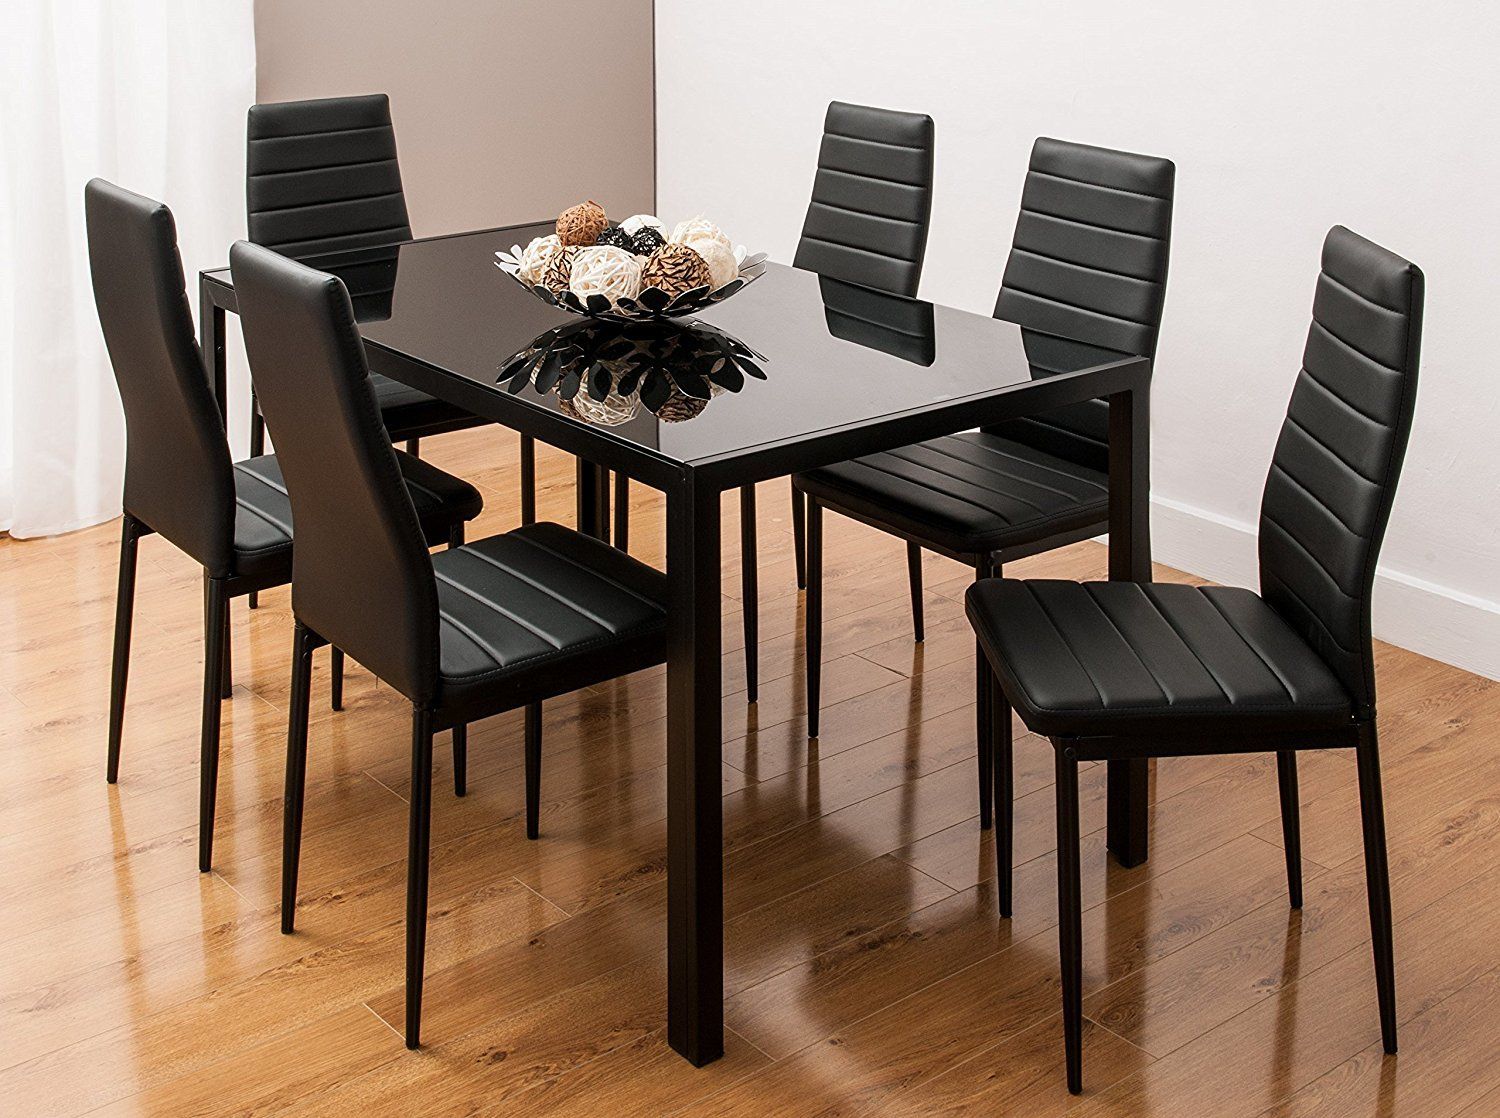 Rosenzweig 7 Piece Dining Set In Most Popular Maynard 5 Piece Dining Sets (View 16 of 20)